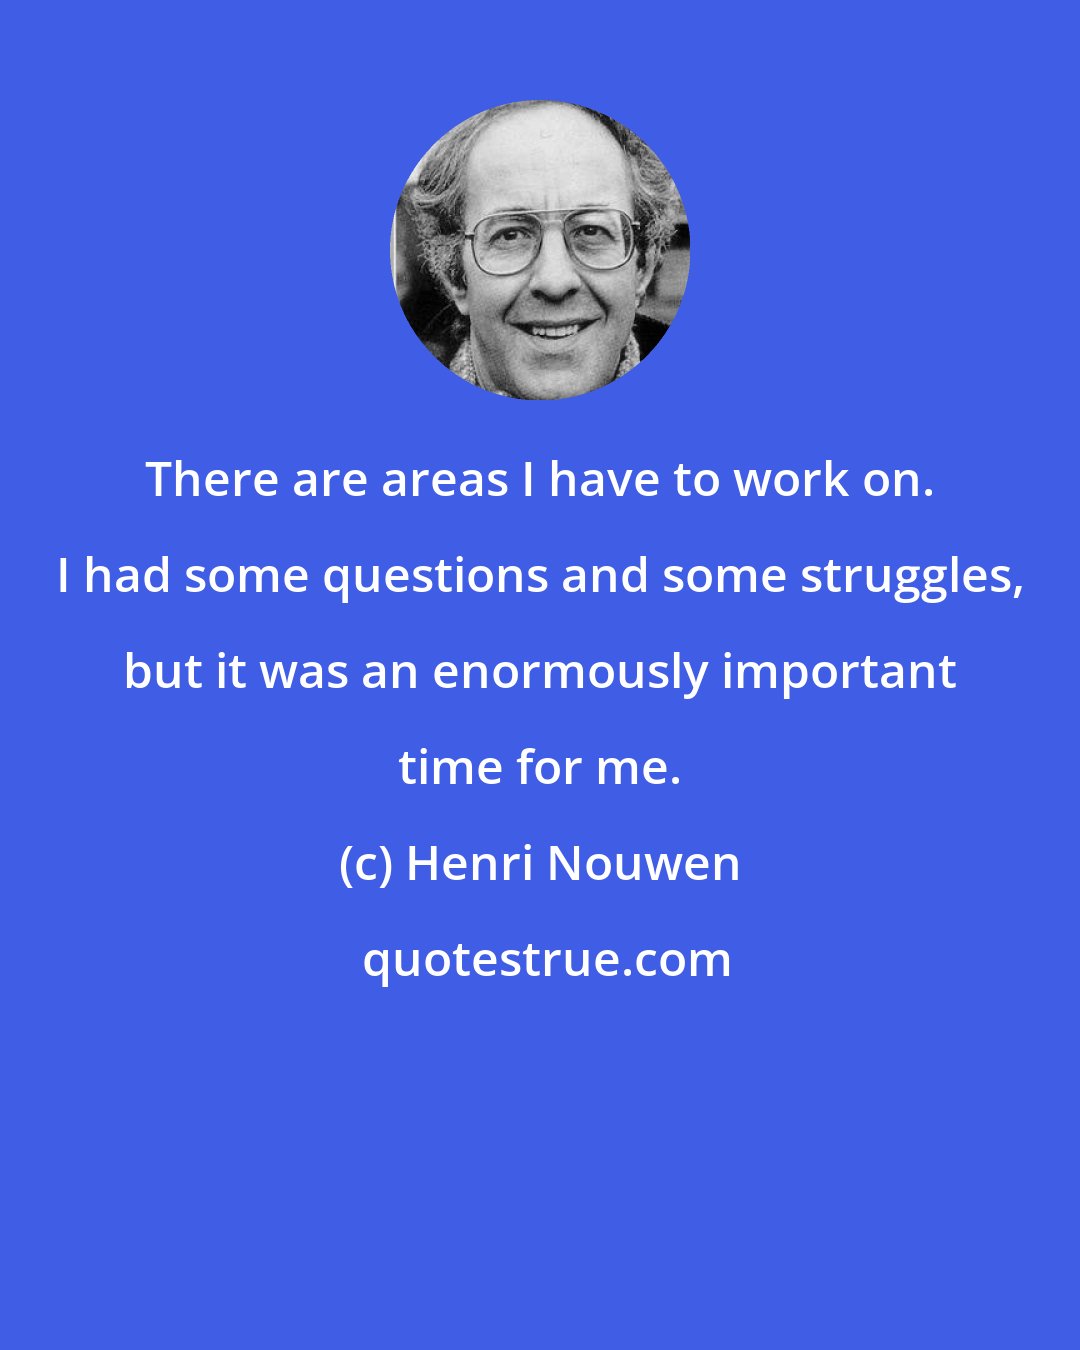 Henri Nouwen: There are areas I have to work on. I had some questions and some struggles, but it was an enormously important time for me.